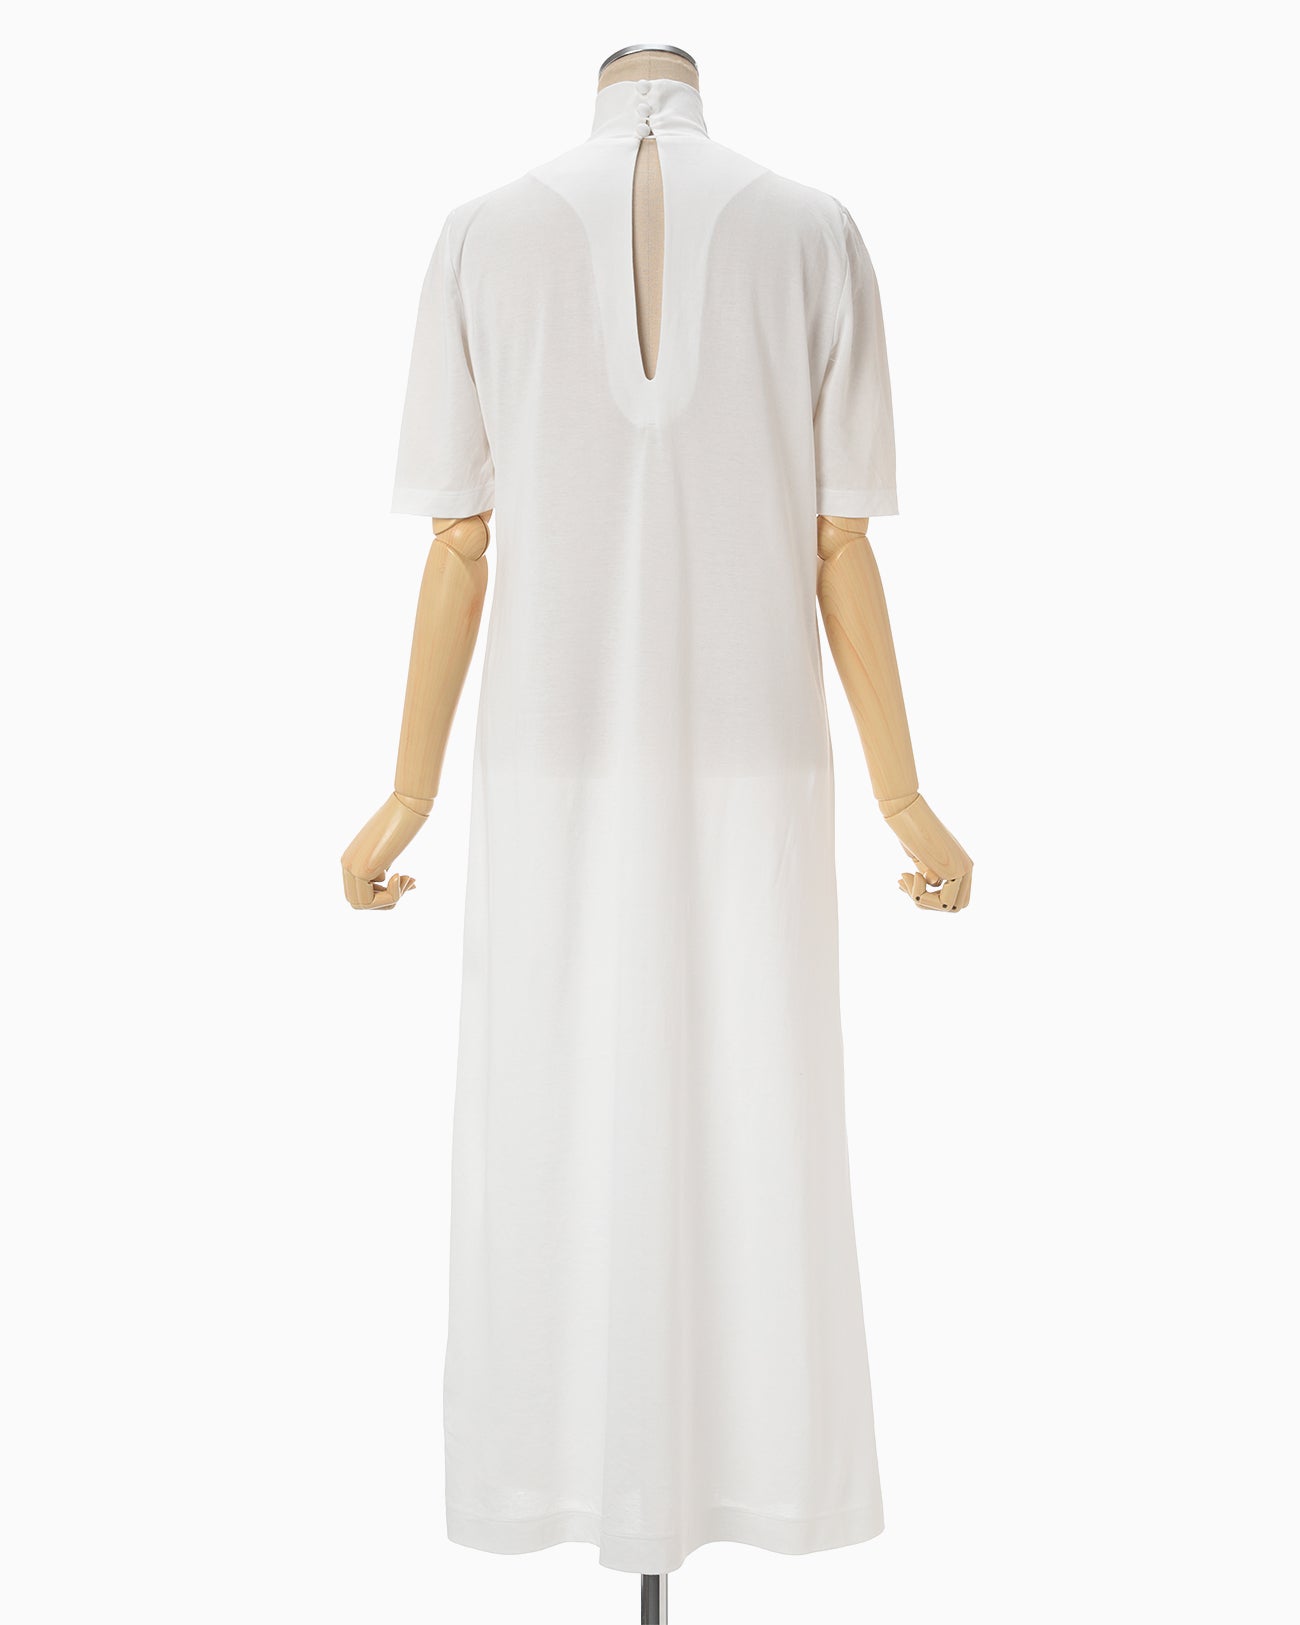 Floral Embossed Cotton Jersey A-Line Dress - white